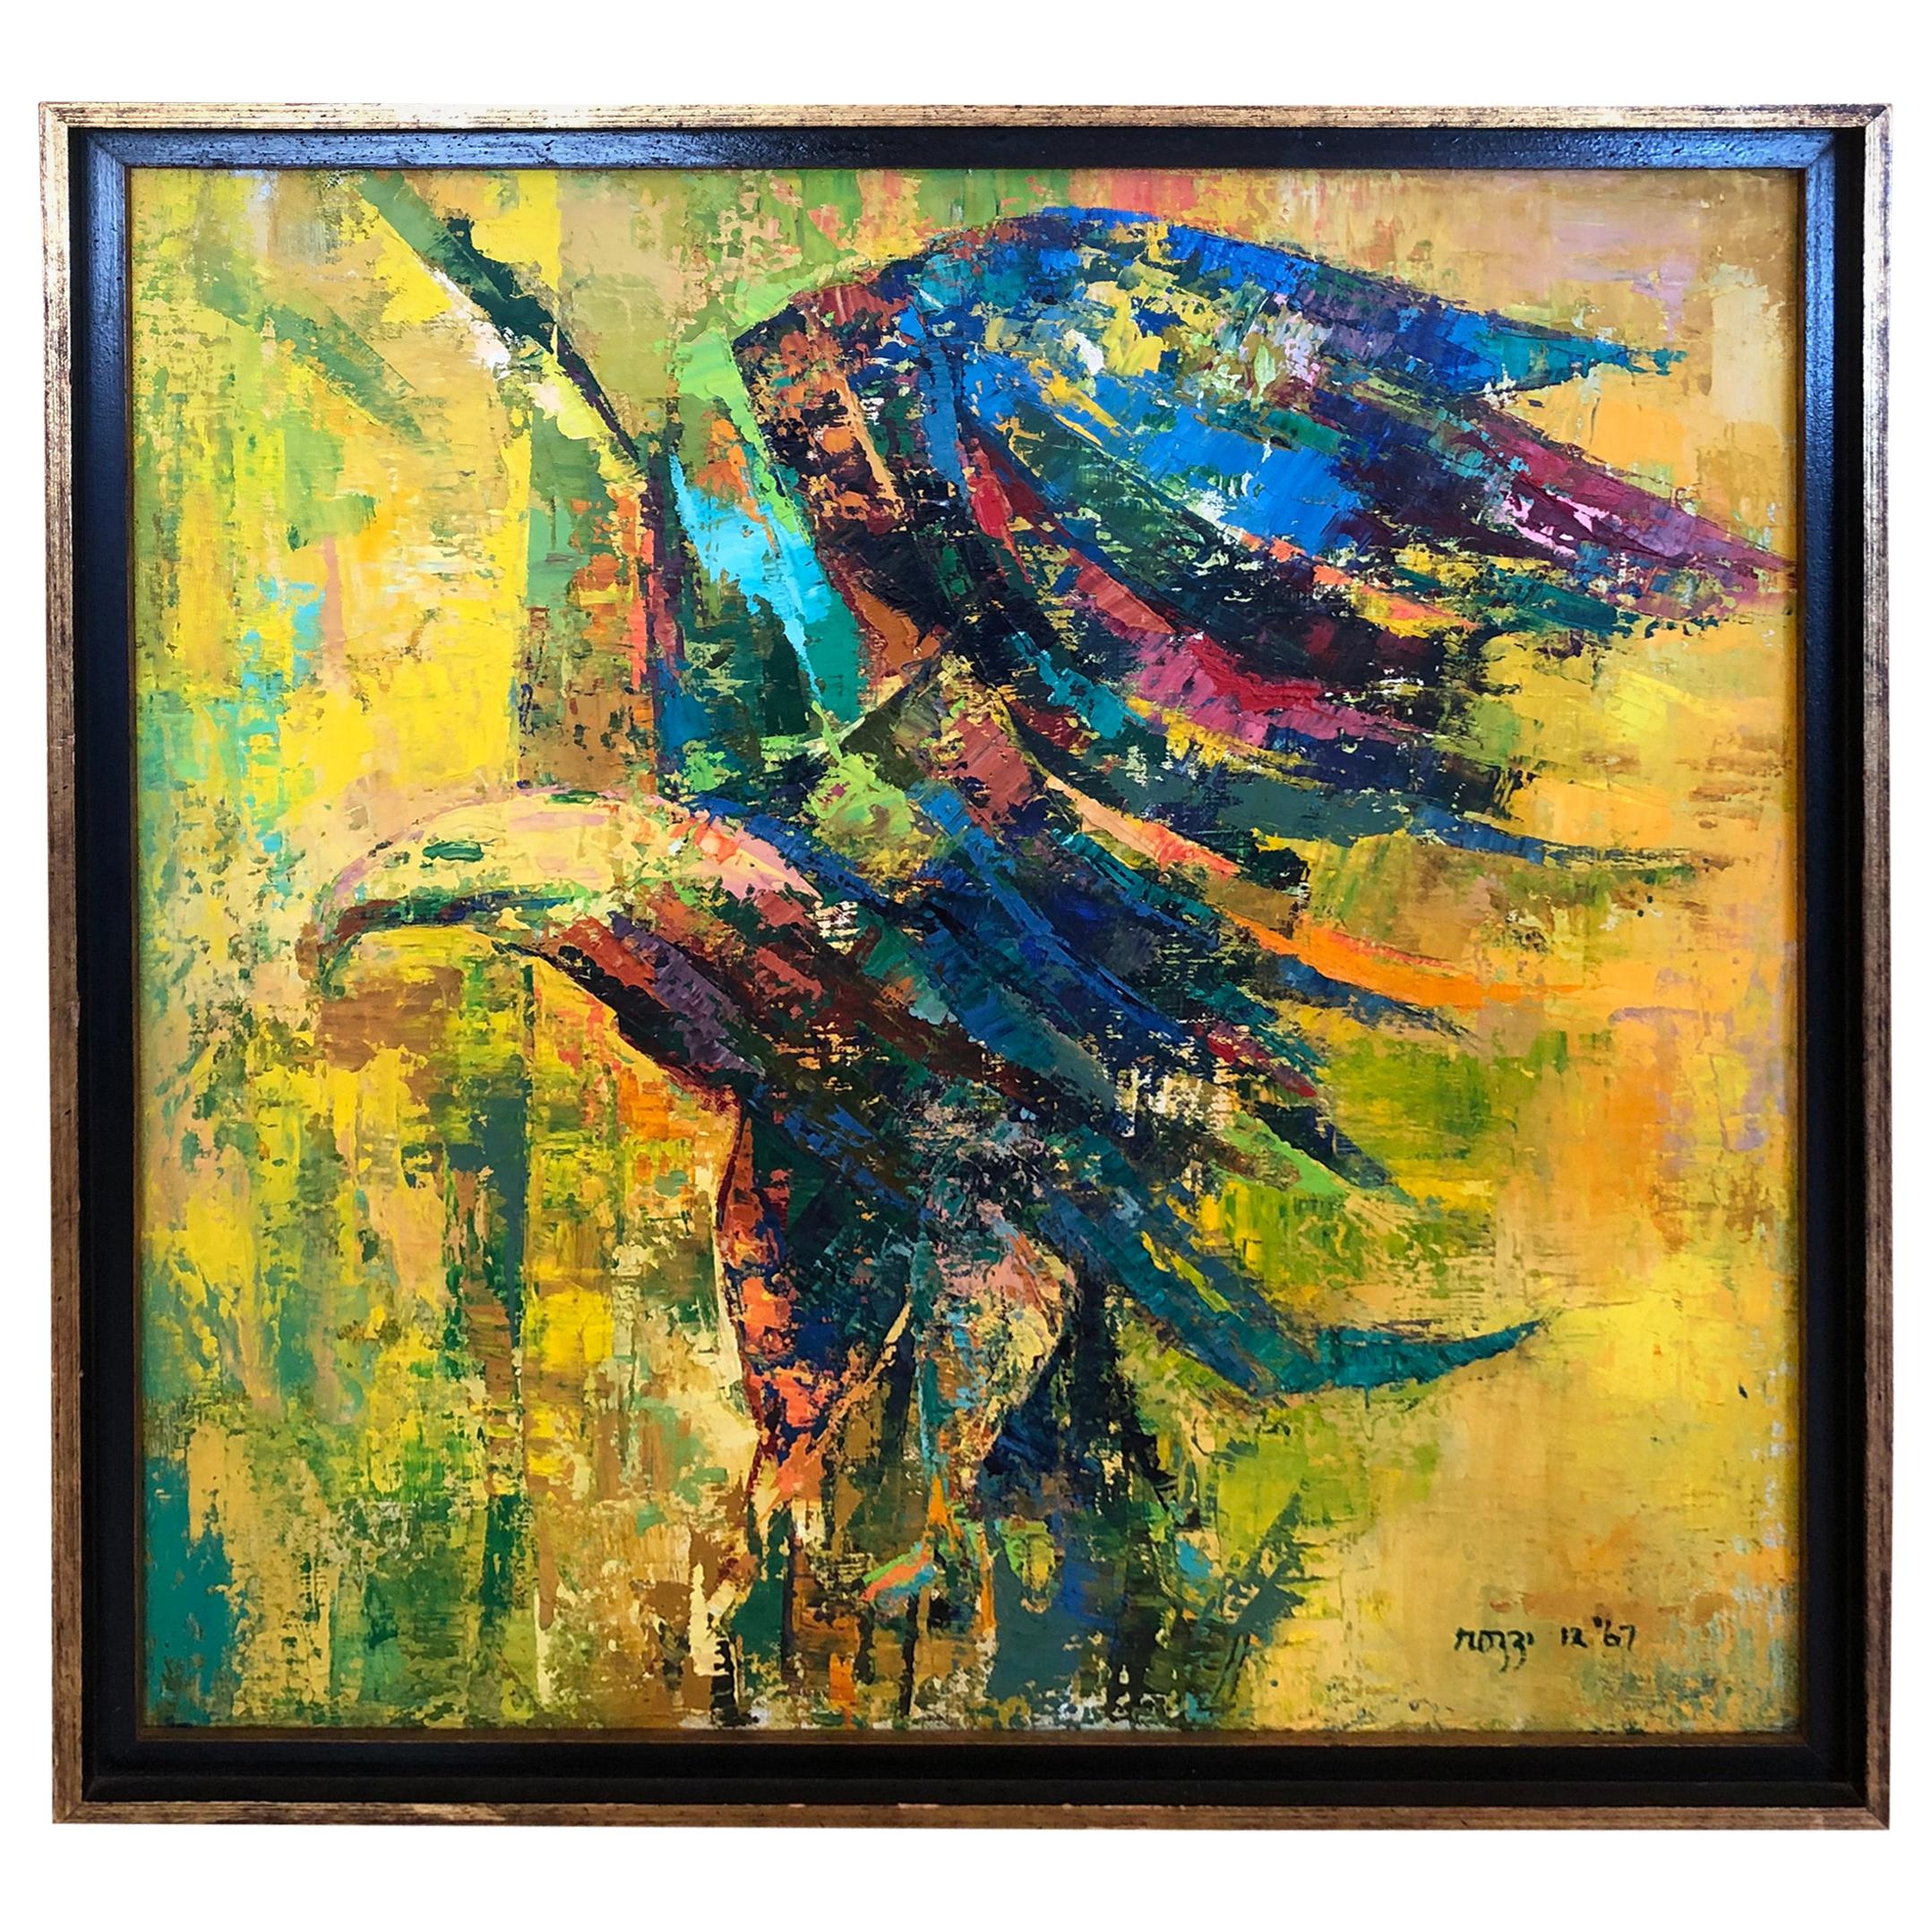 Striking Original Contemporary Oil Painting of Eagle